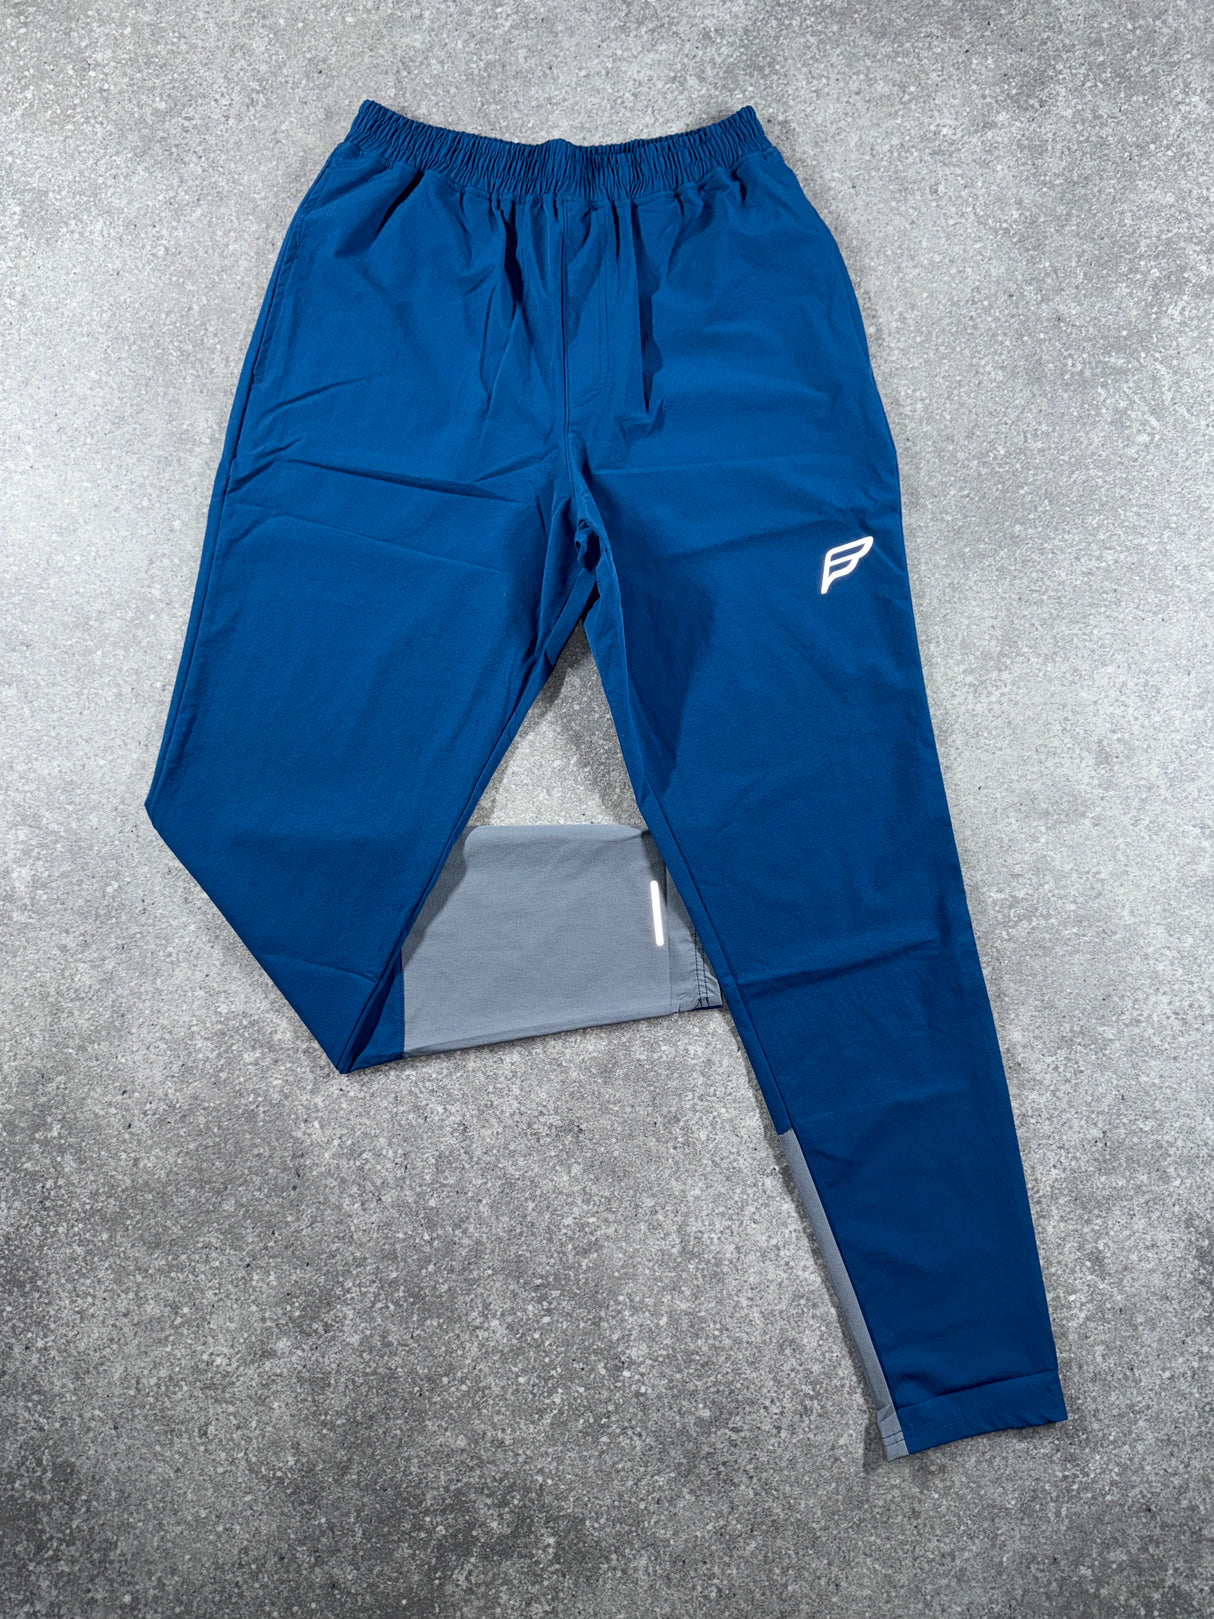 Frequency - Thrive Pants - Dynamic Blue